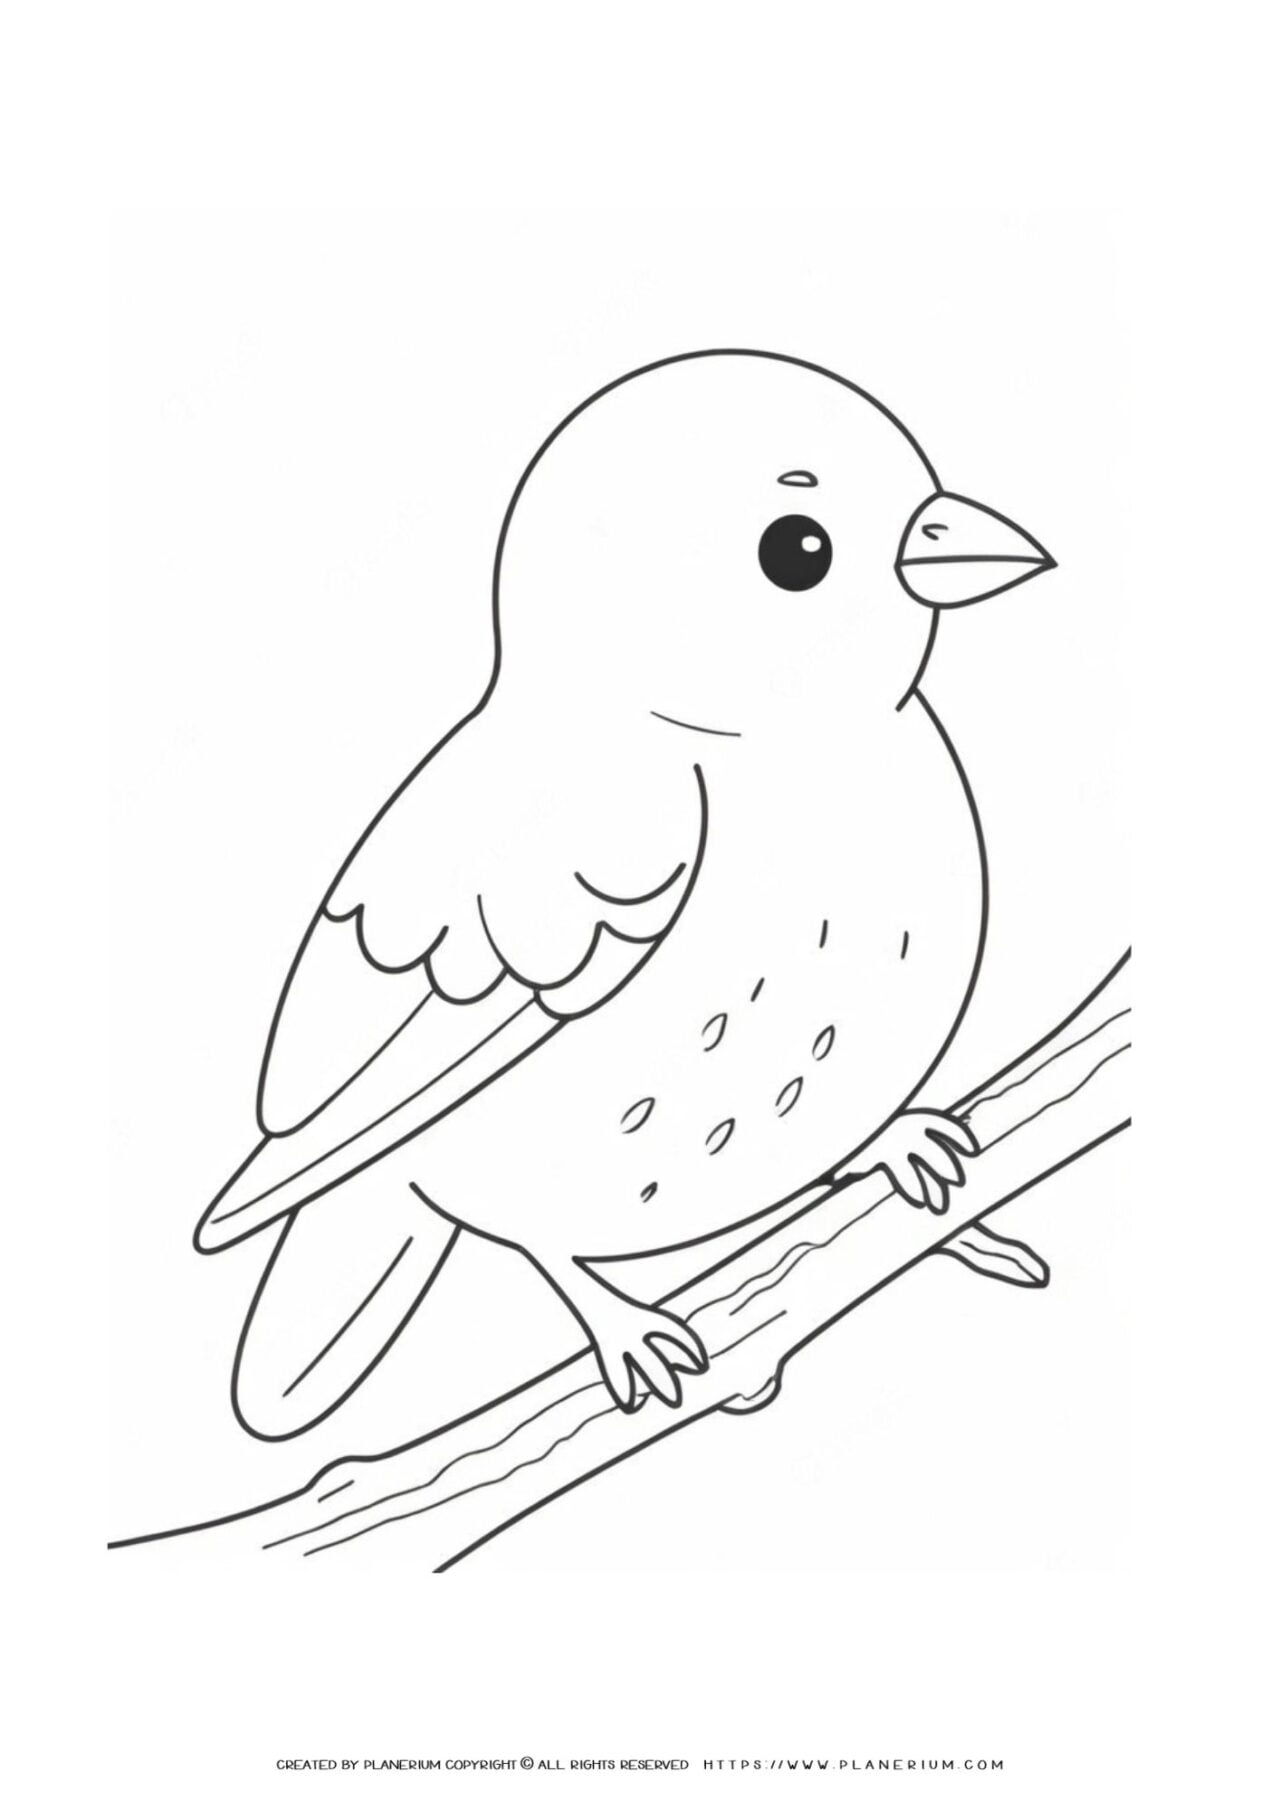 Outline drawing of a bird on a branch.